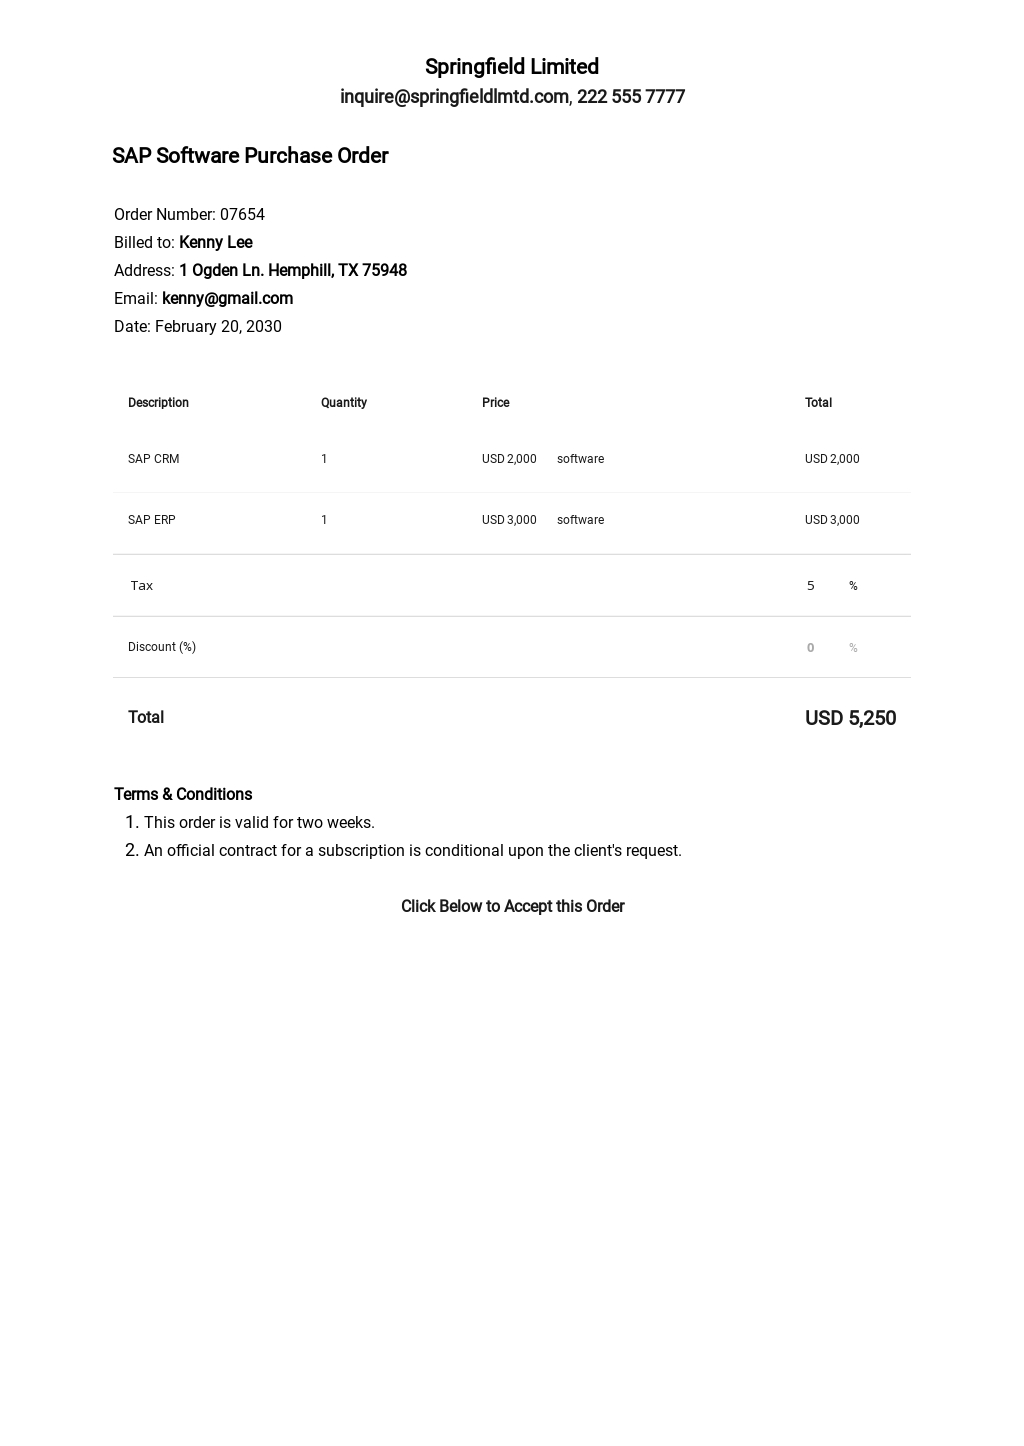 Sap Software Purchase Order Template.jpe